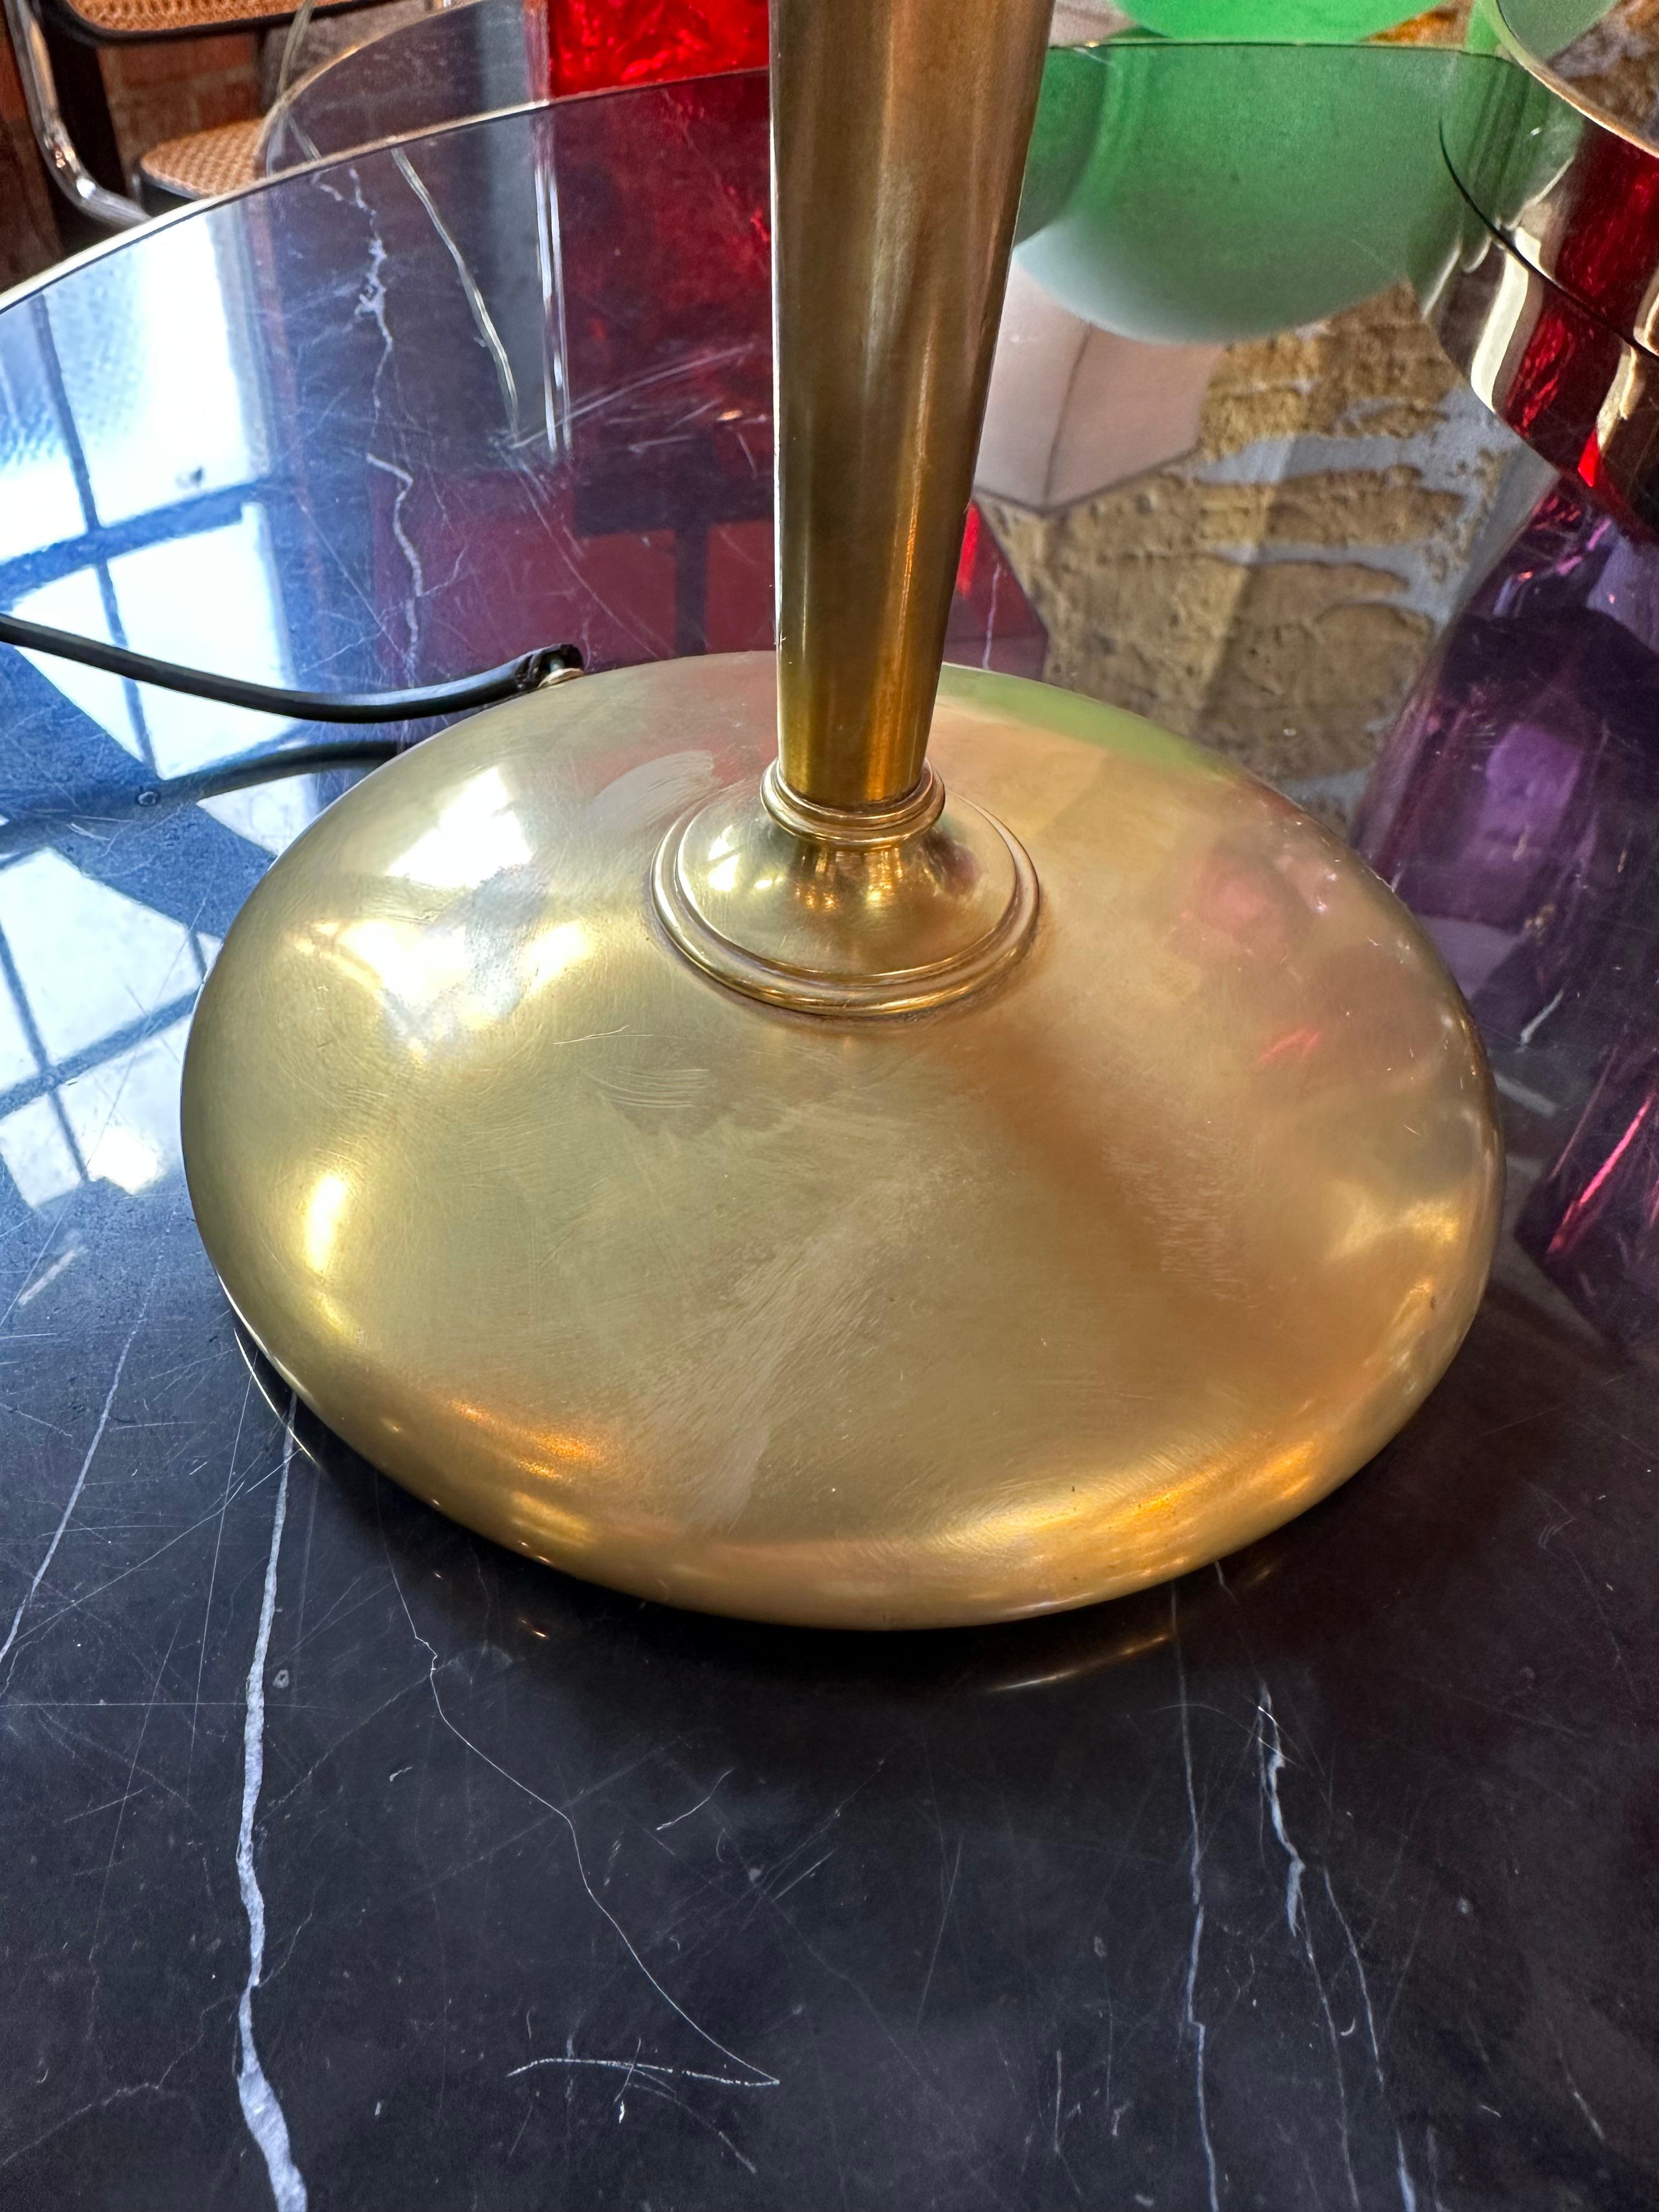 Certainly! An Art Deco Italian table lamp fully made of brass from the 1960s is likely to feature a sleek and polished design with clean, geometric lines. The brass material lends the lamp a sense of luxury and opulence, and the lamp may be